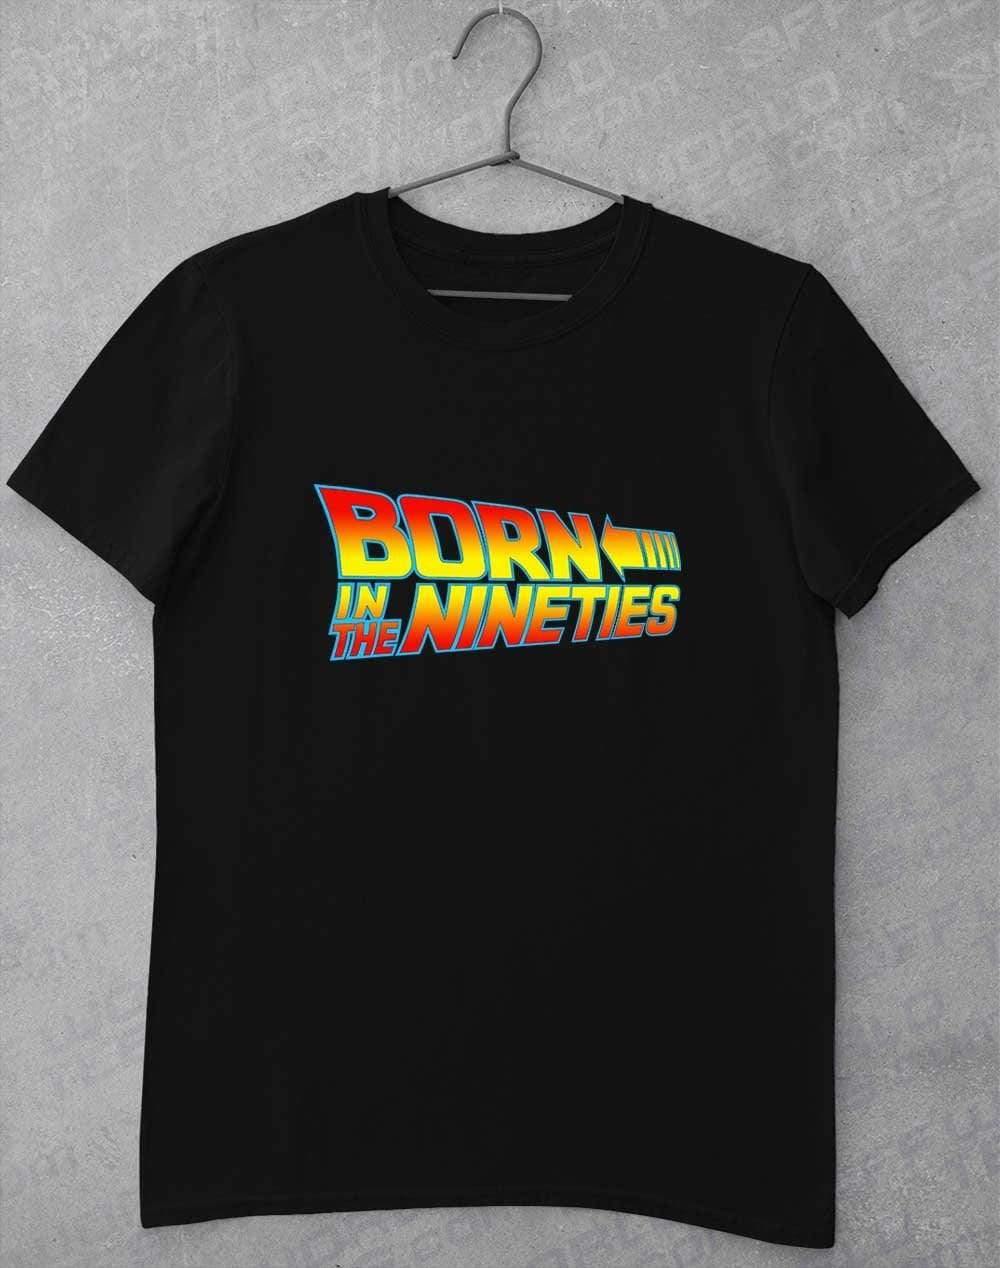 Born in the... (CHOOSE YOUR DECADE!) T-shirt THE NINETIES - Black / S  - Off World Tees